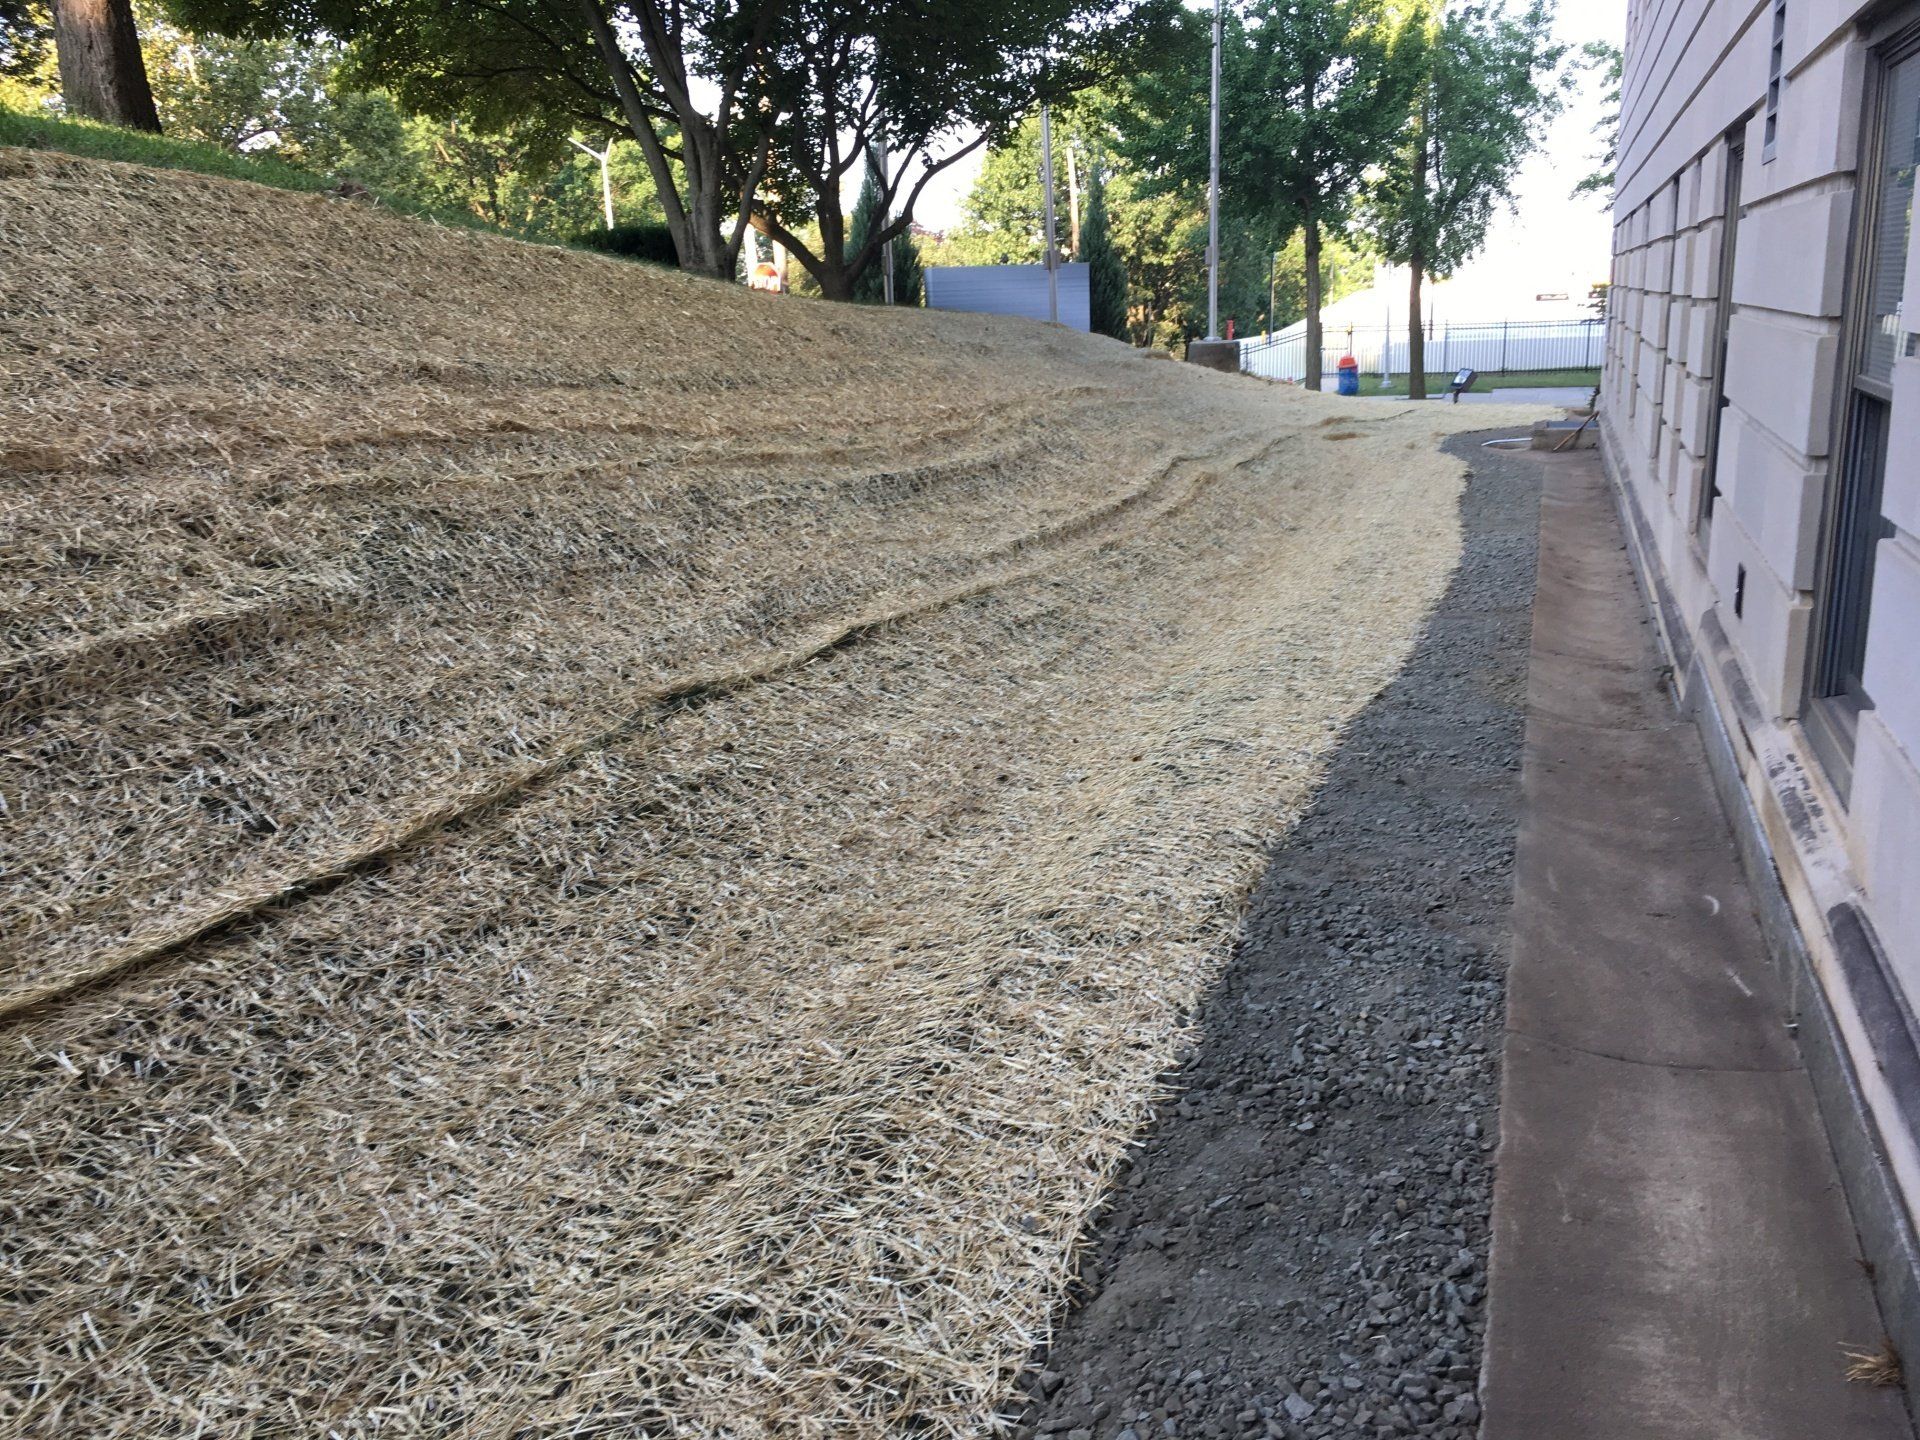 A gravel driveway leading to a building with trees in the background.